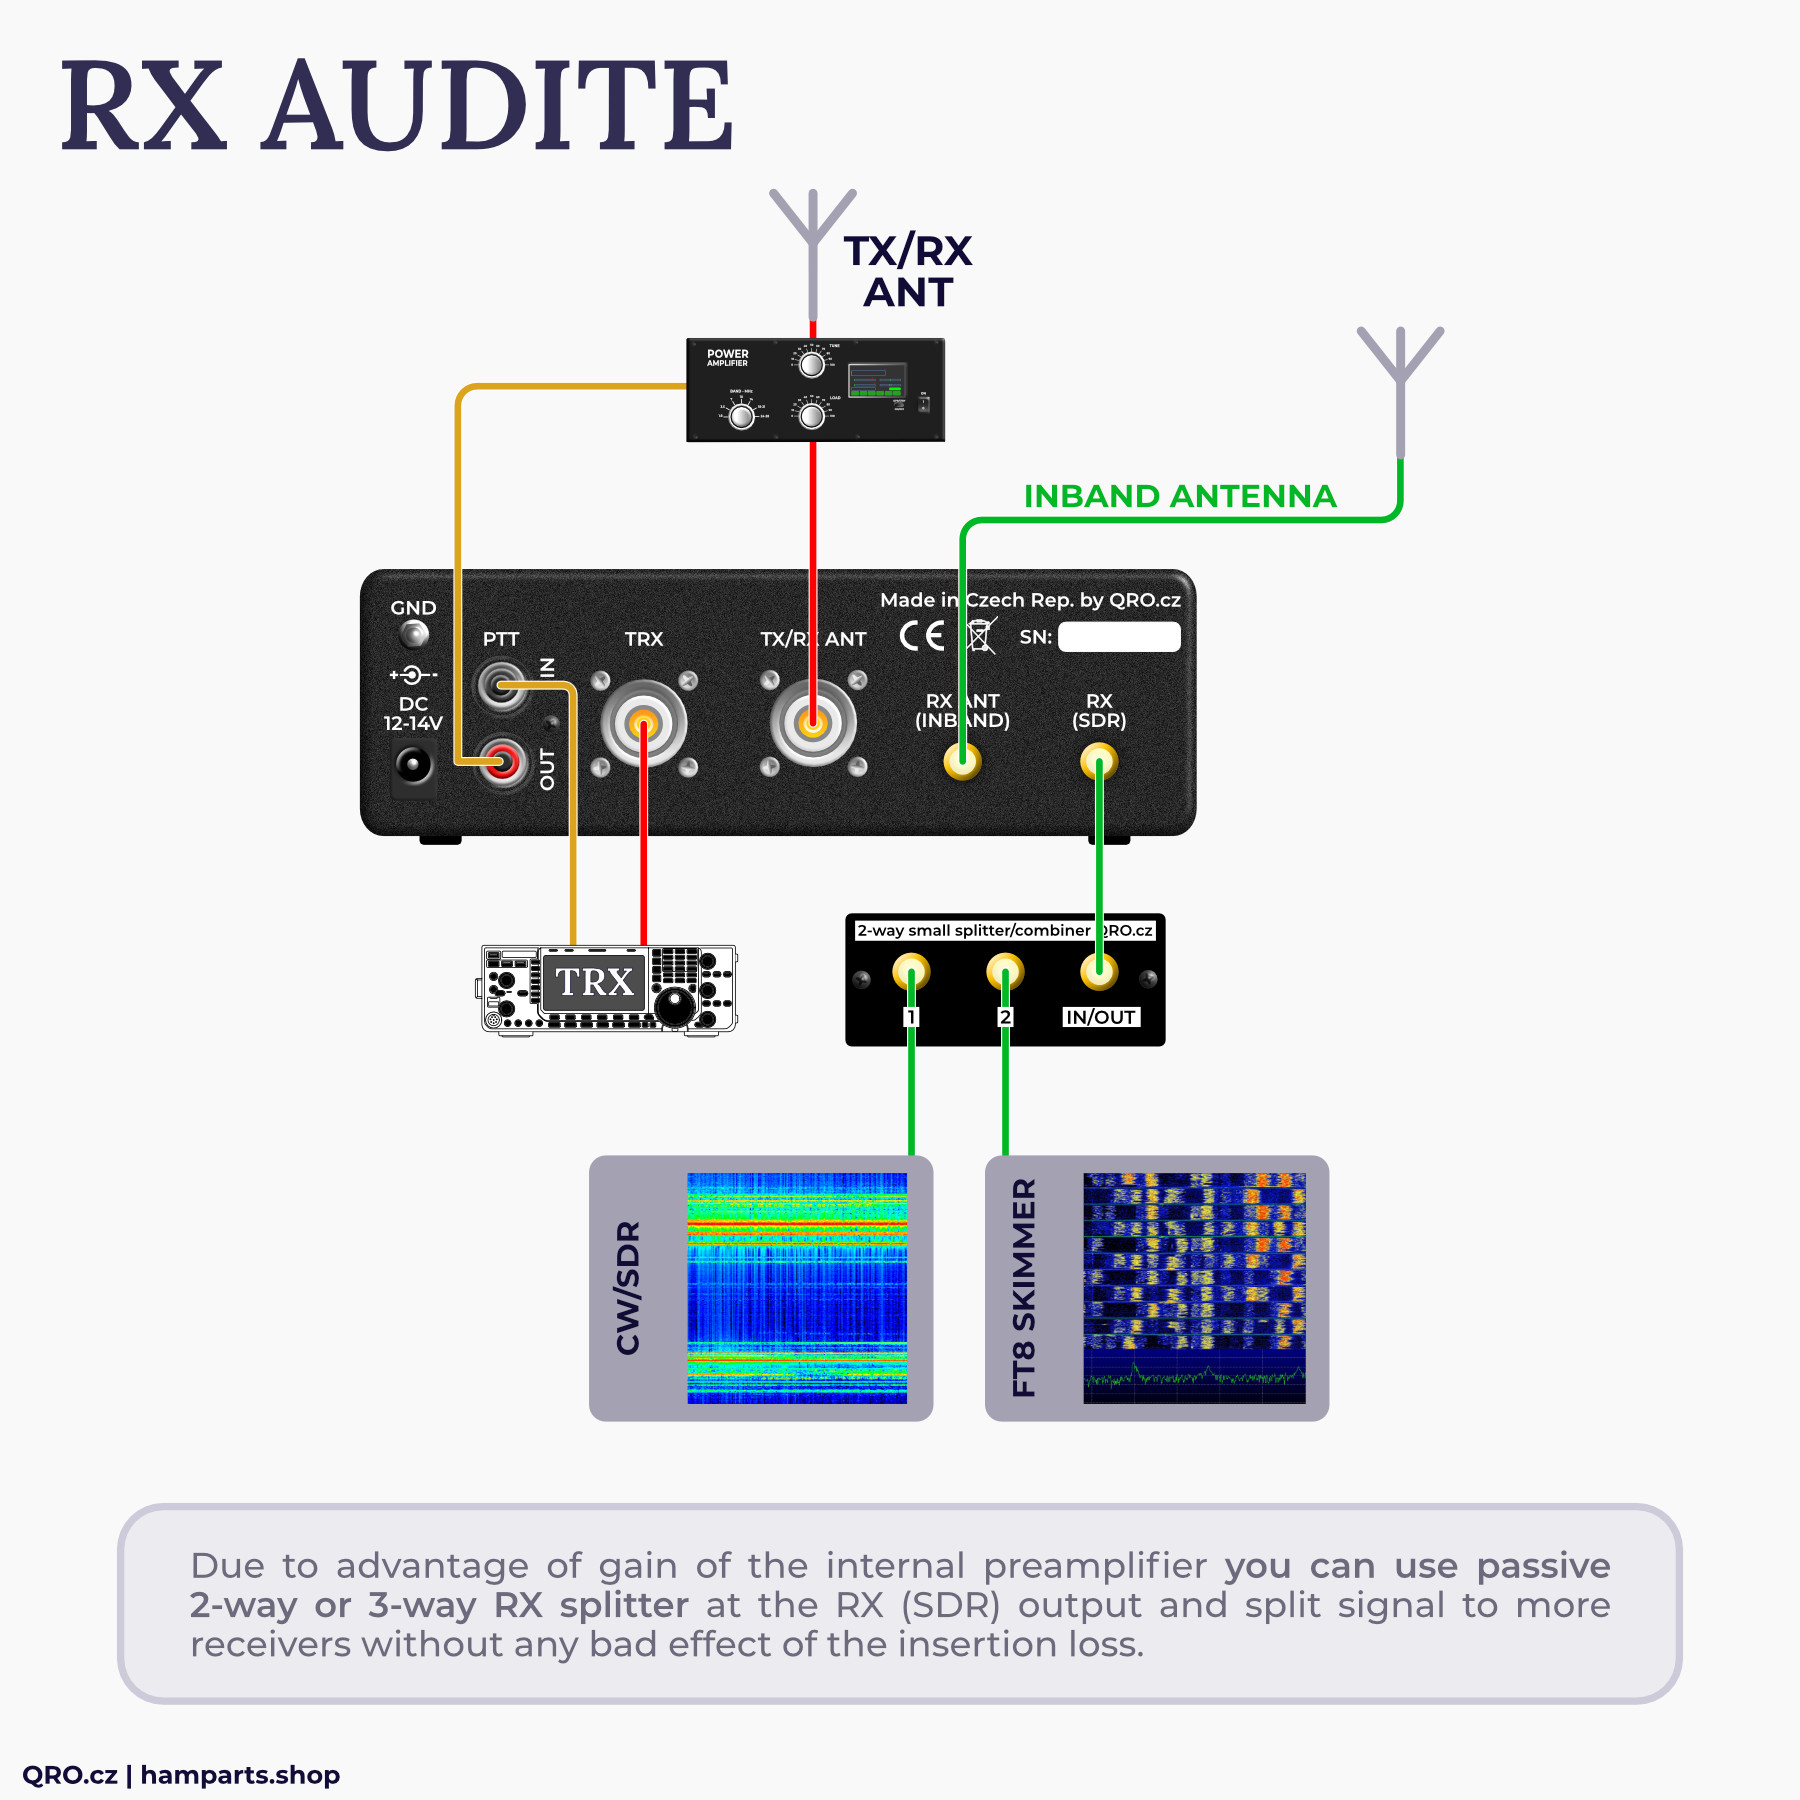 rx audite sdr switch with passive 2-way or 3-way rx splitter by qro.cz hamparts.shop